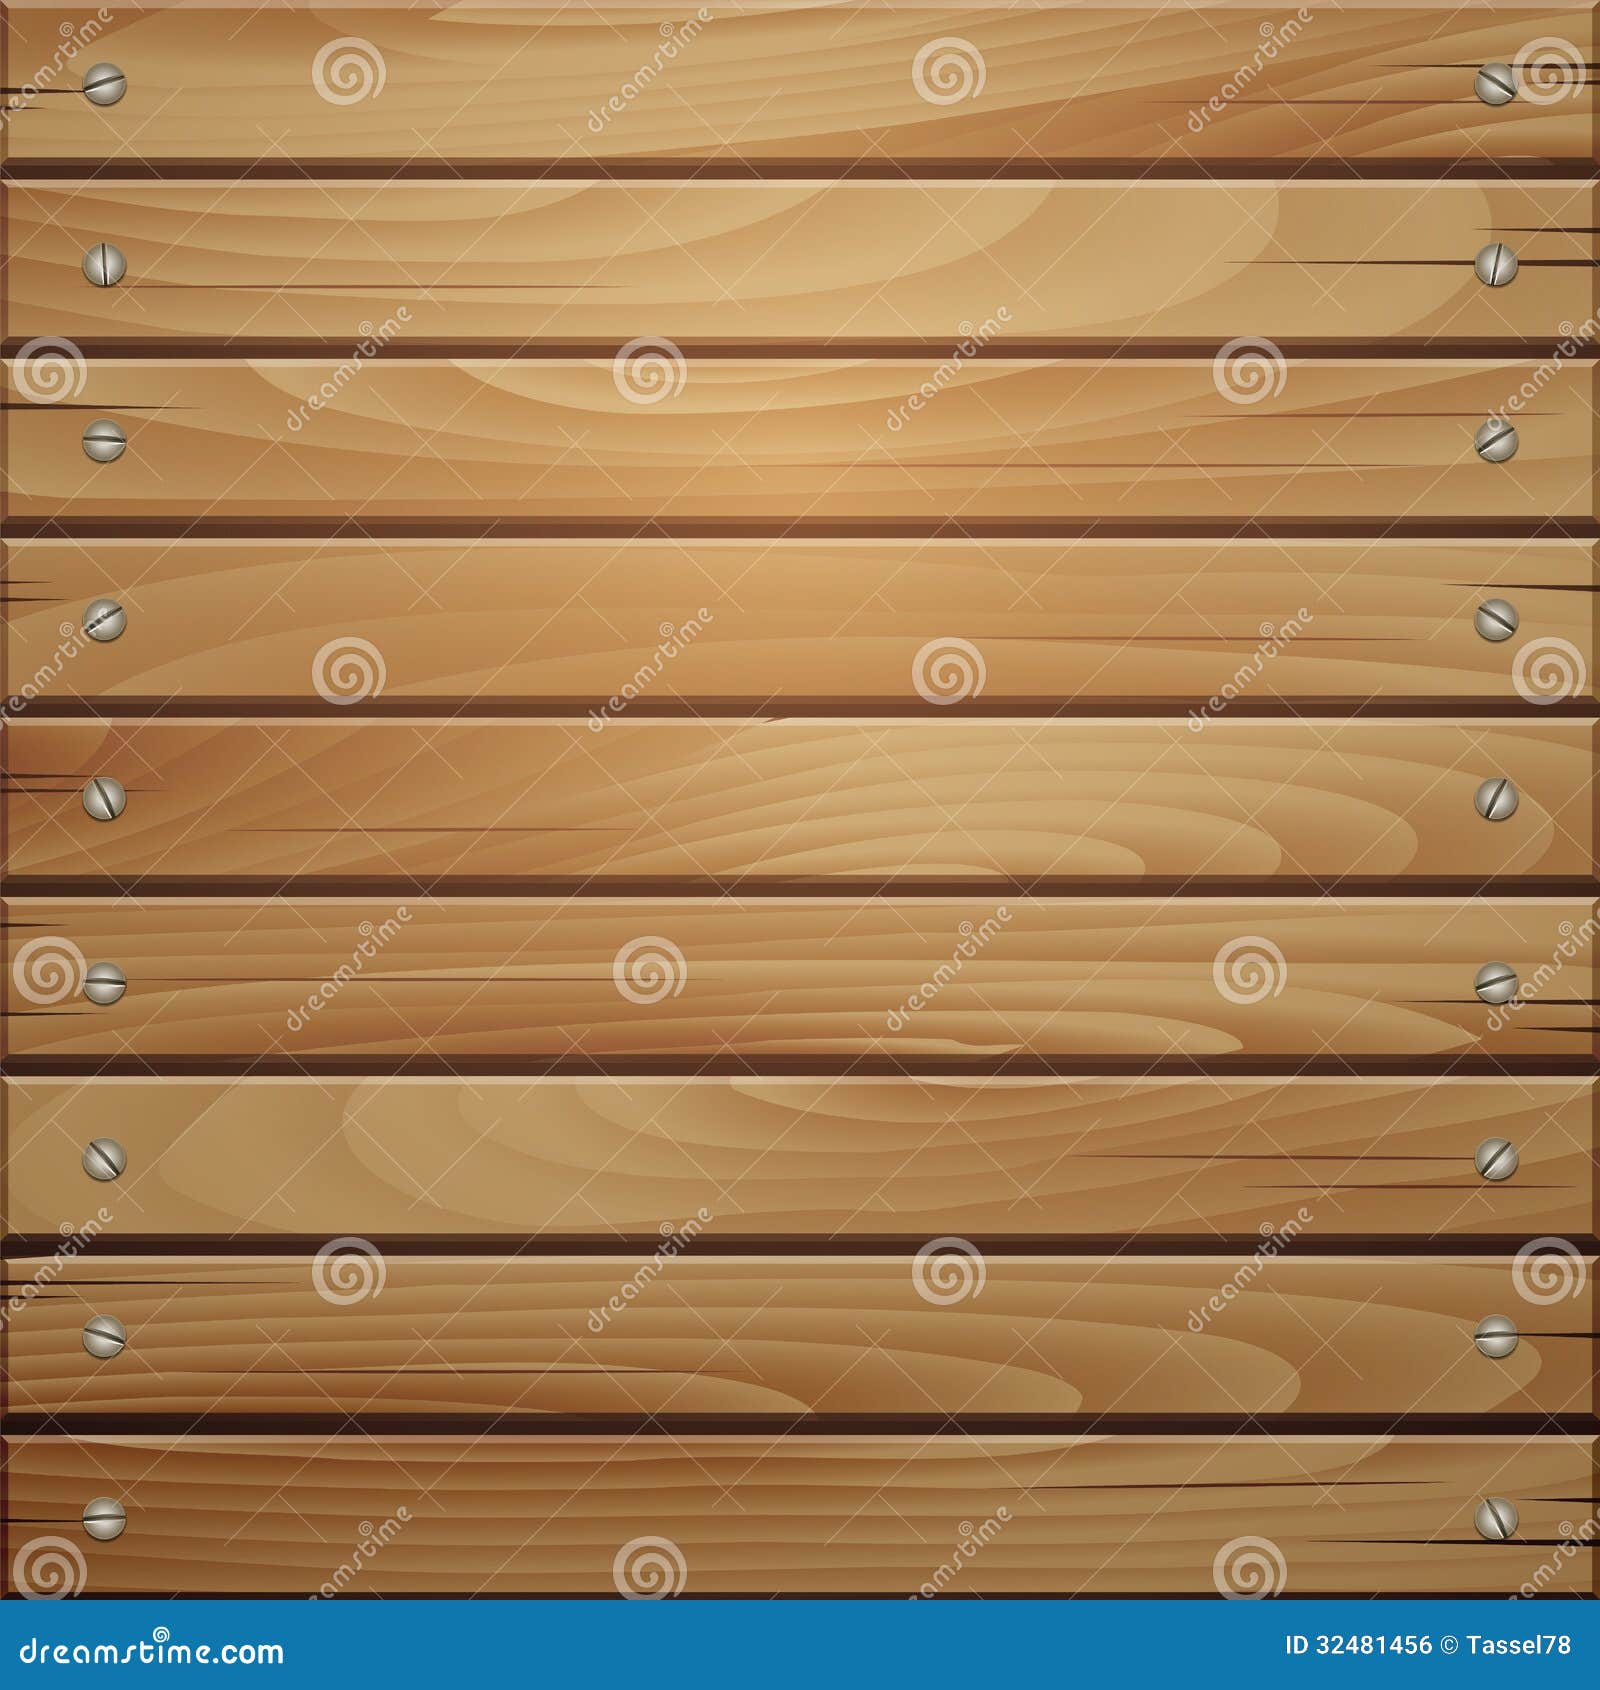 wood plank brown texture background